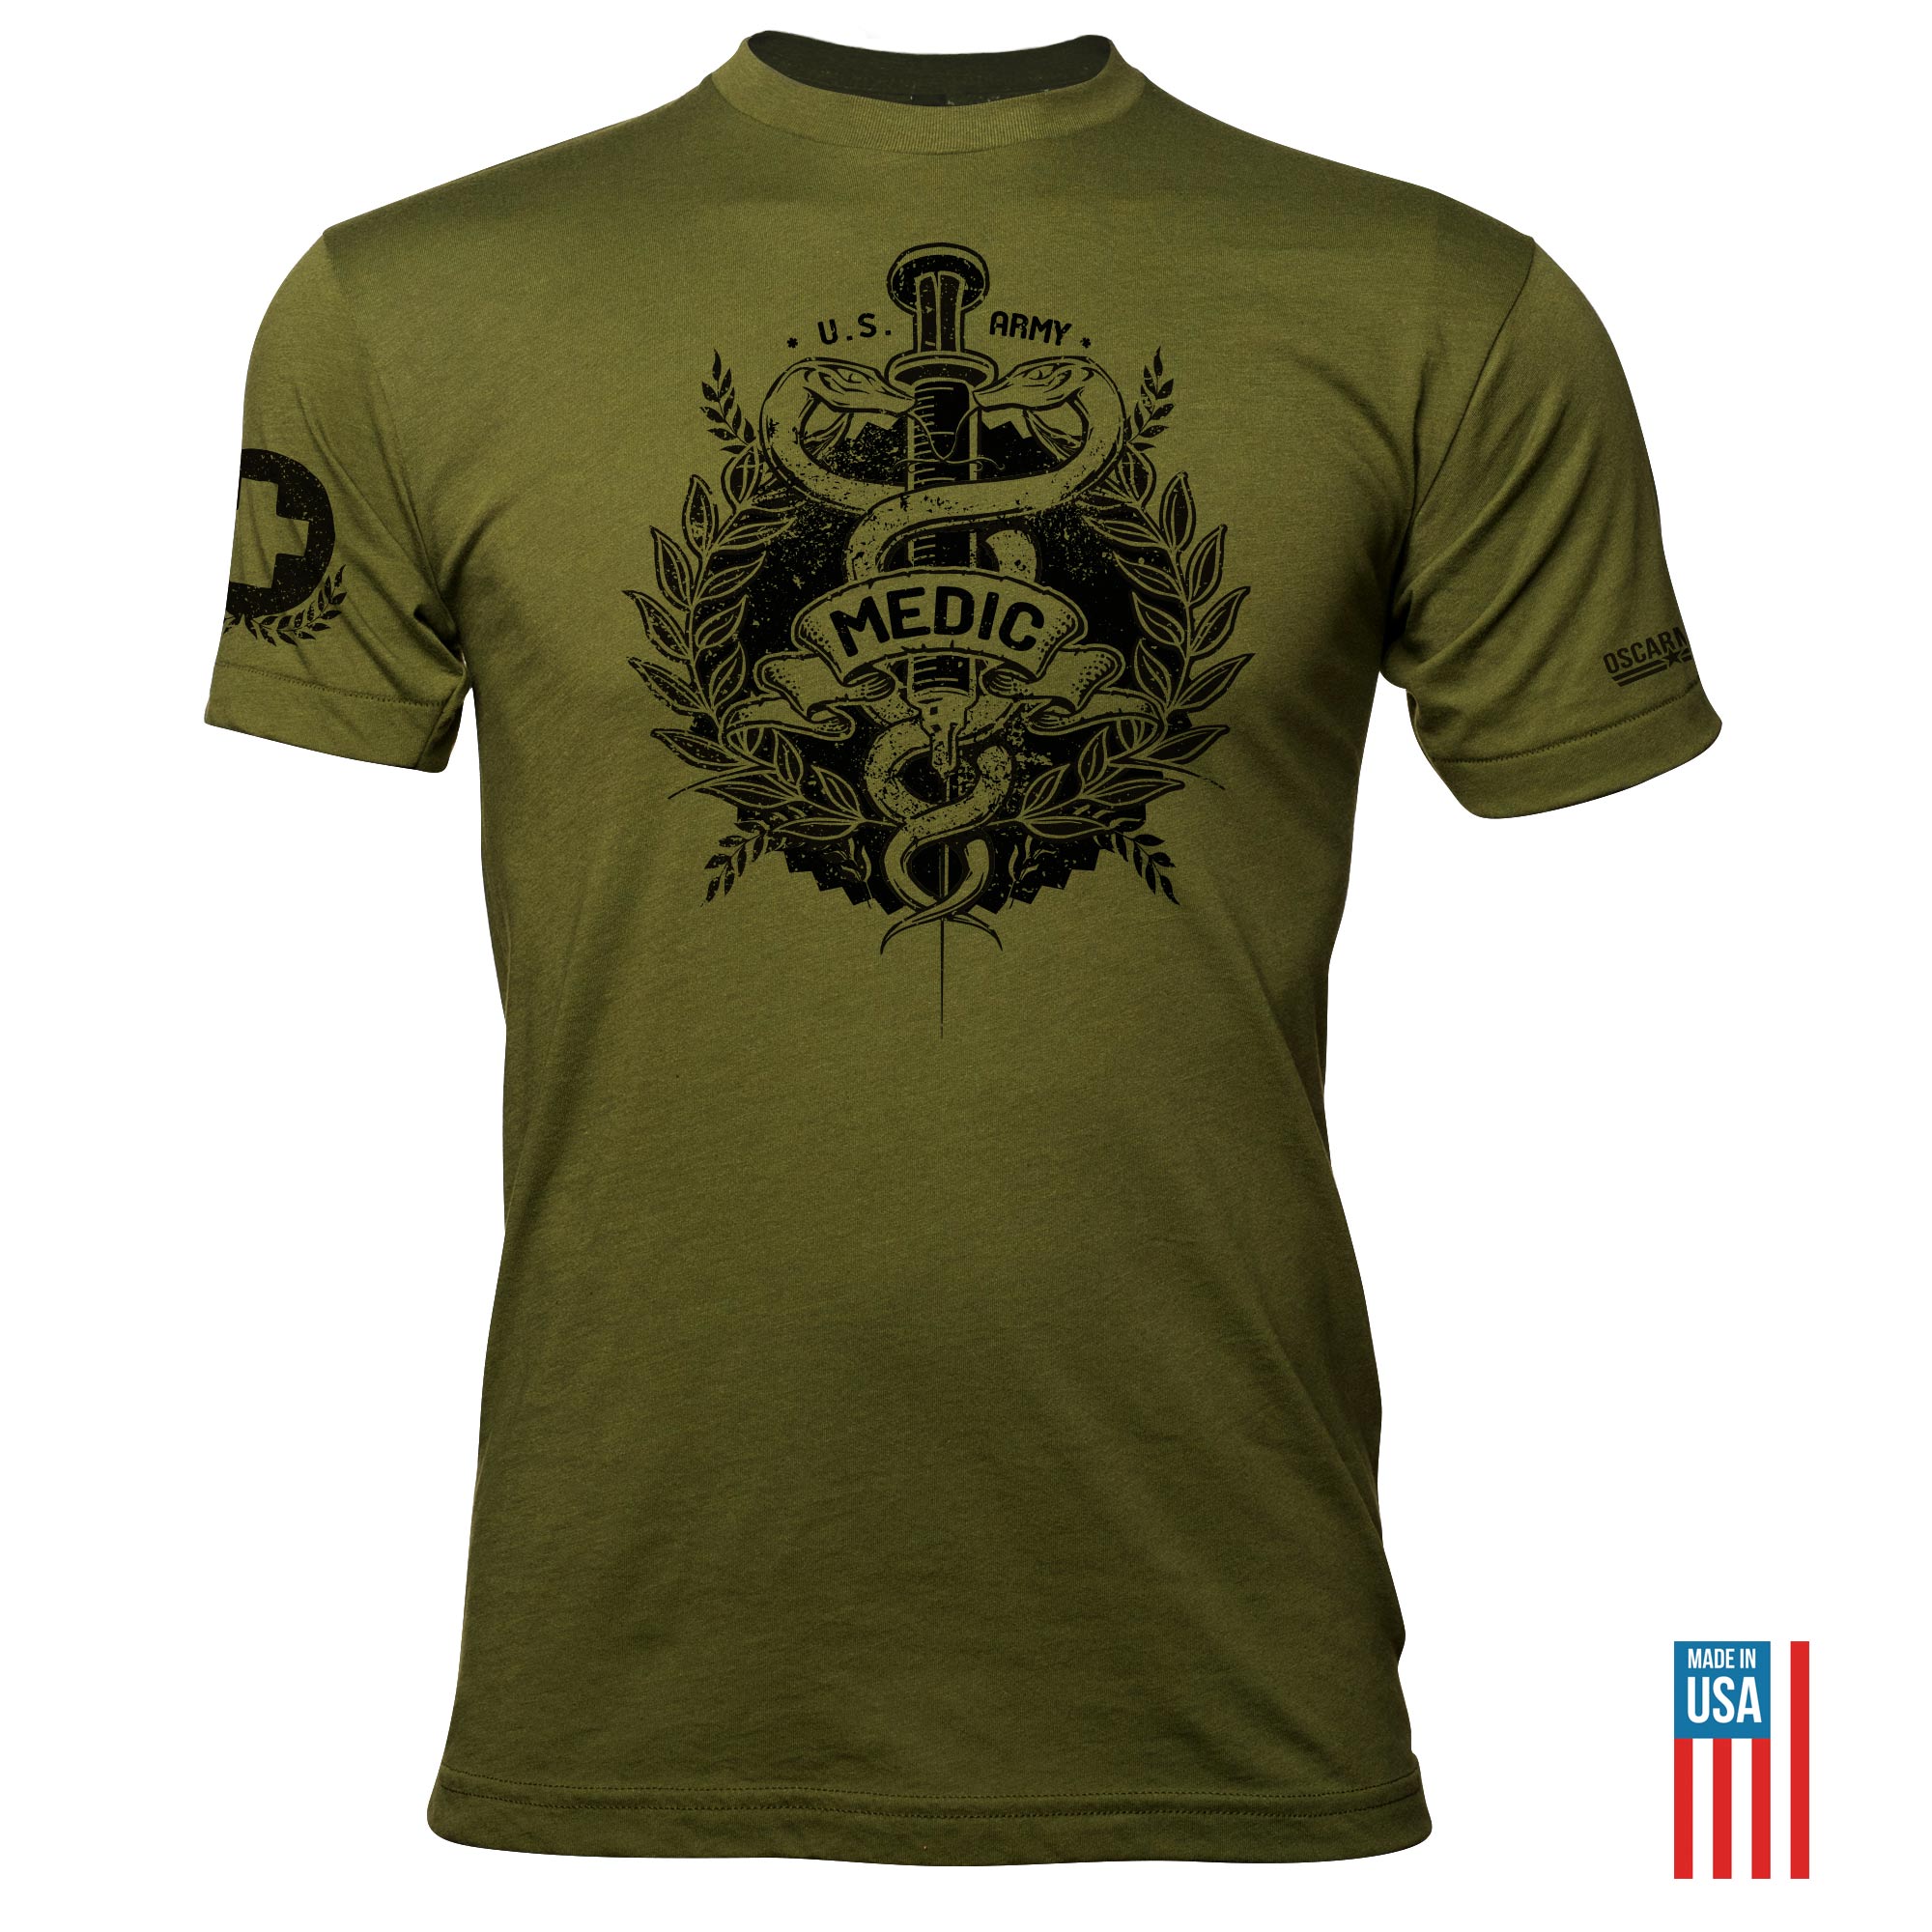 Army Medic Tee T-Shirt from Oscar Mike Apparel